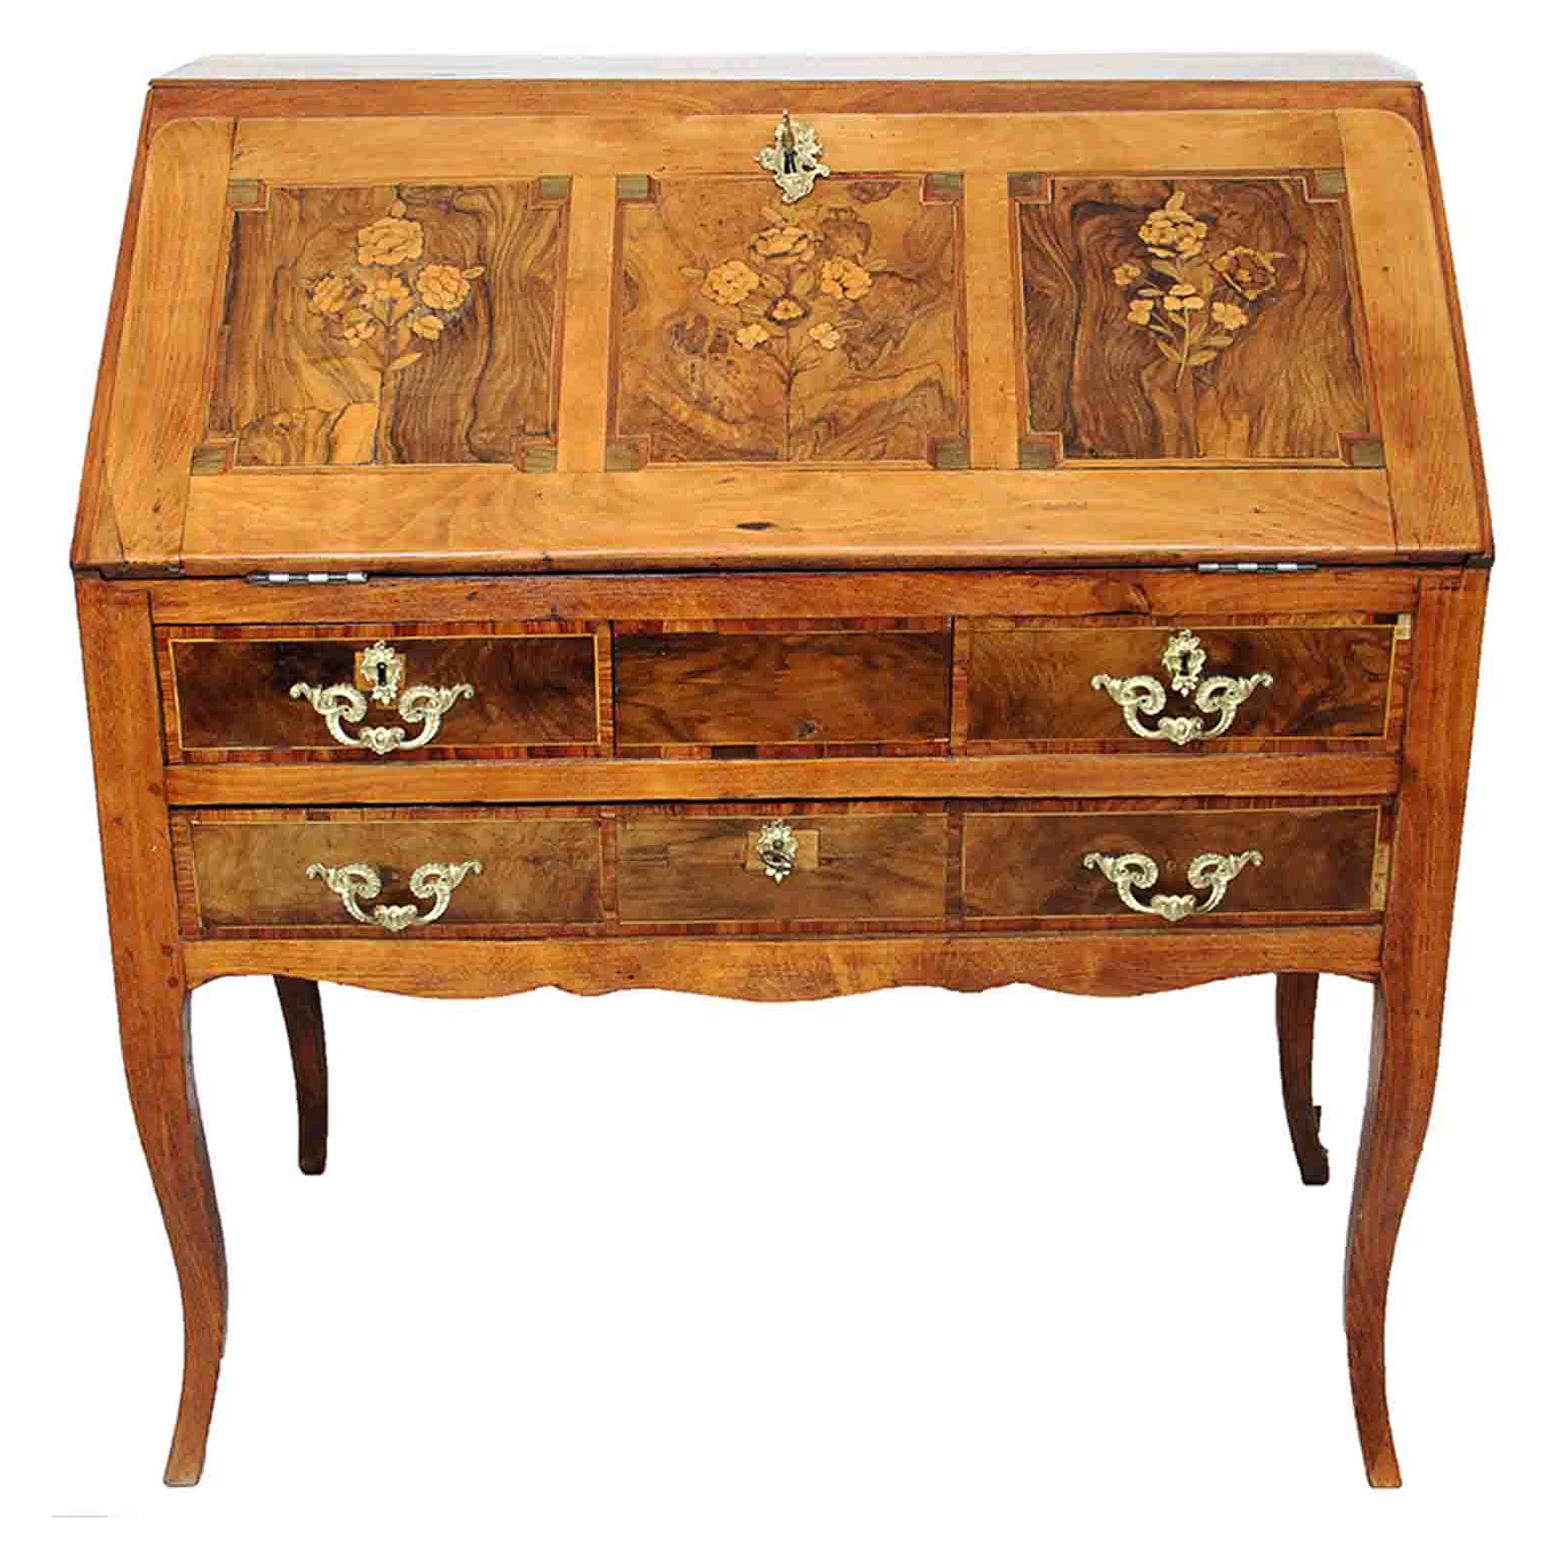 18th Century Louis XV Slant Front Desk in Veneer Wood with Floral Decor For Sale